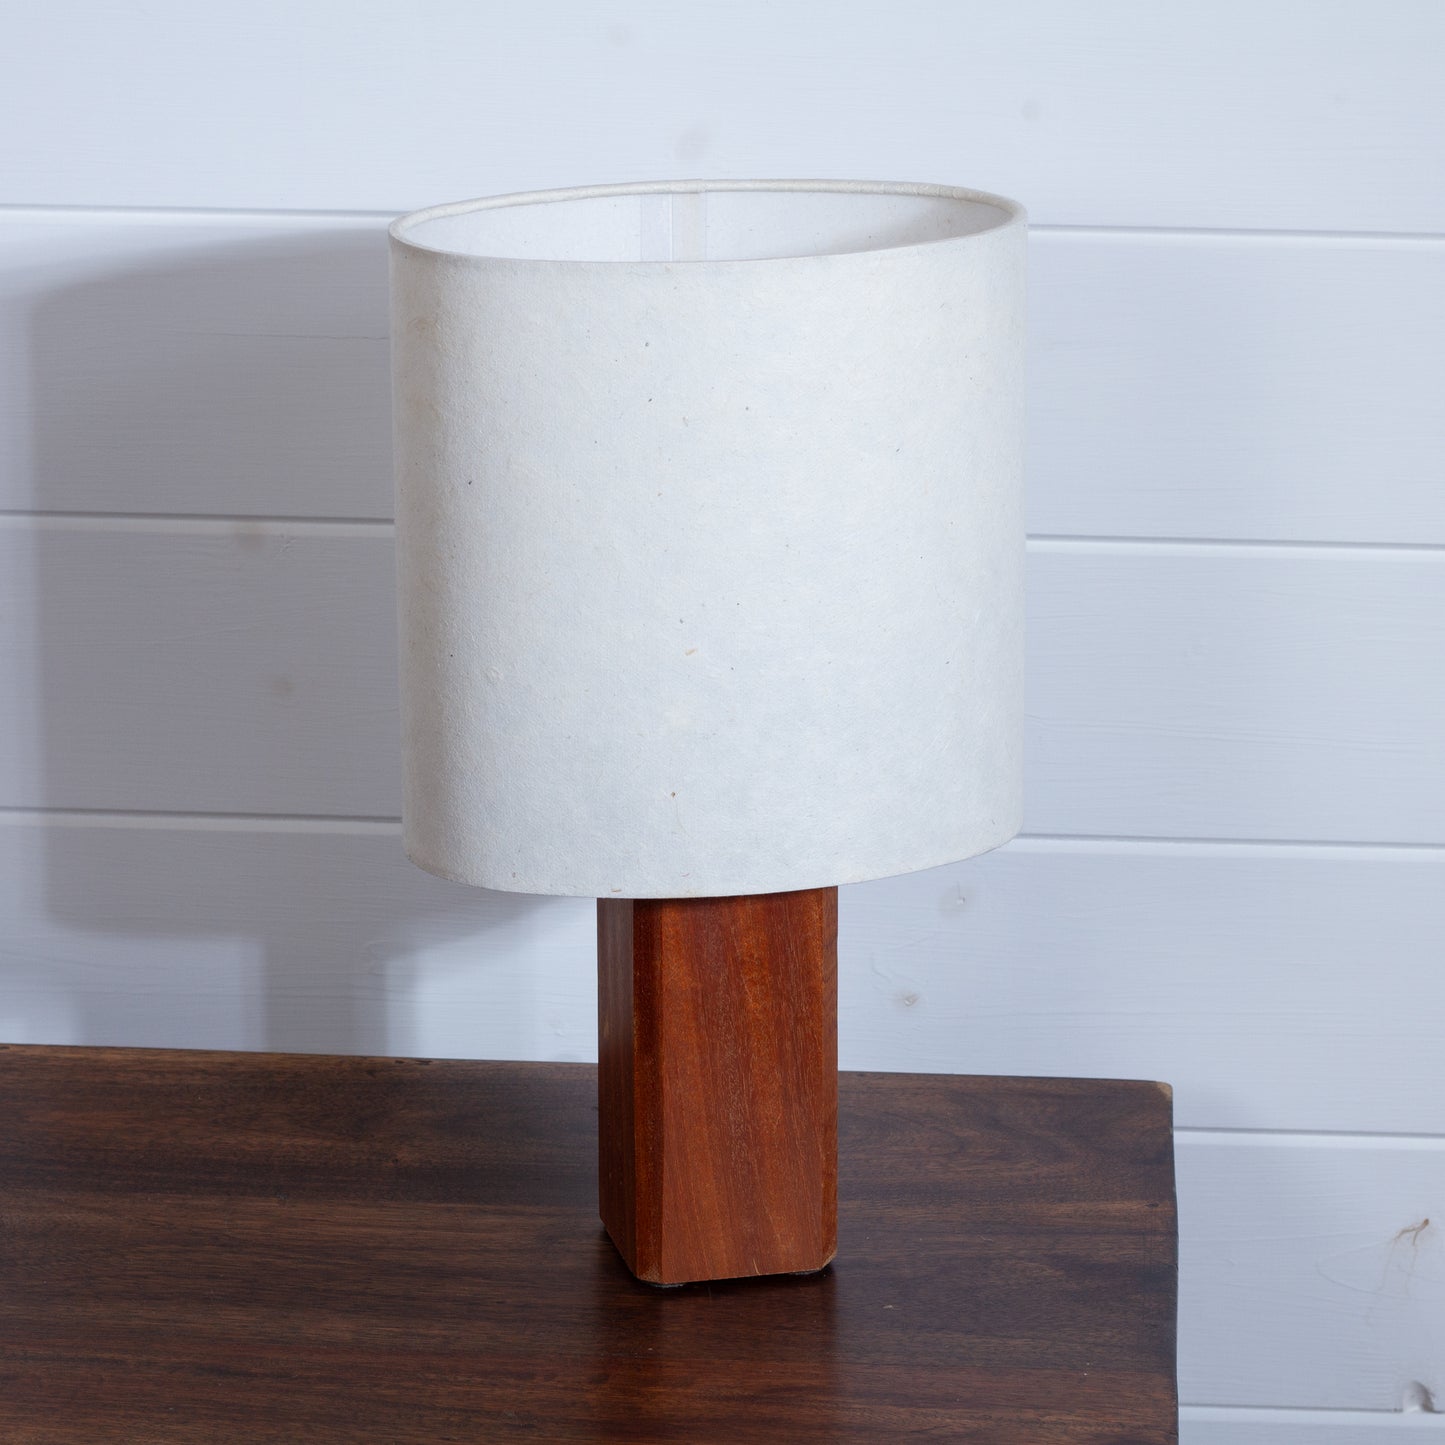 Square Sapele Lamp Base with Oval Lamp shade in P54 - Natural Lokta